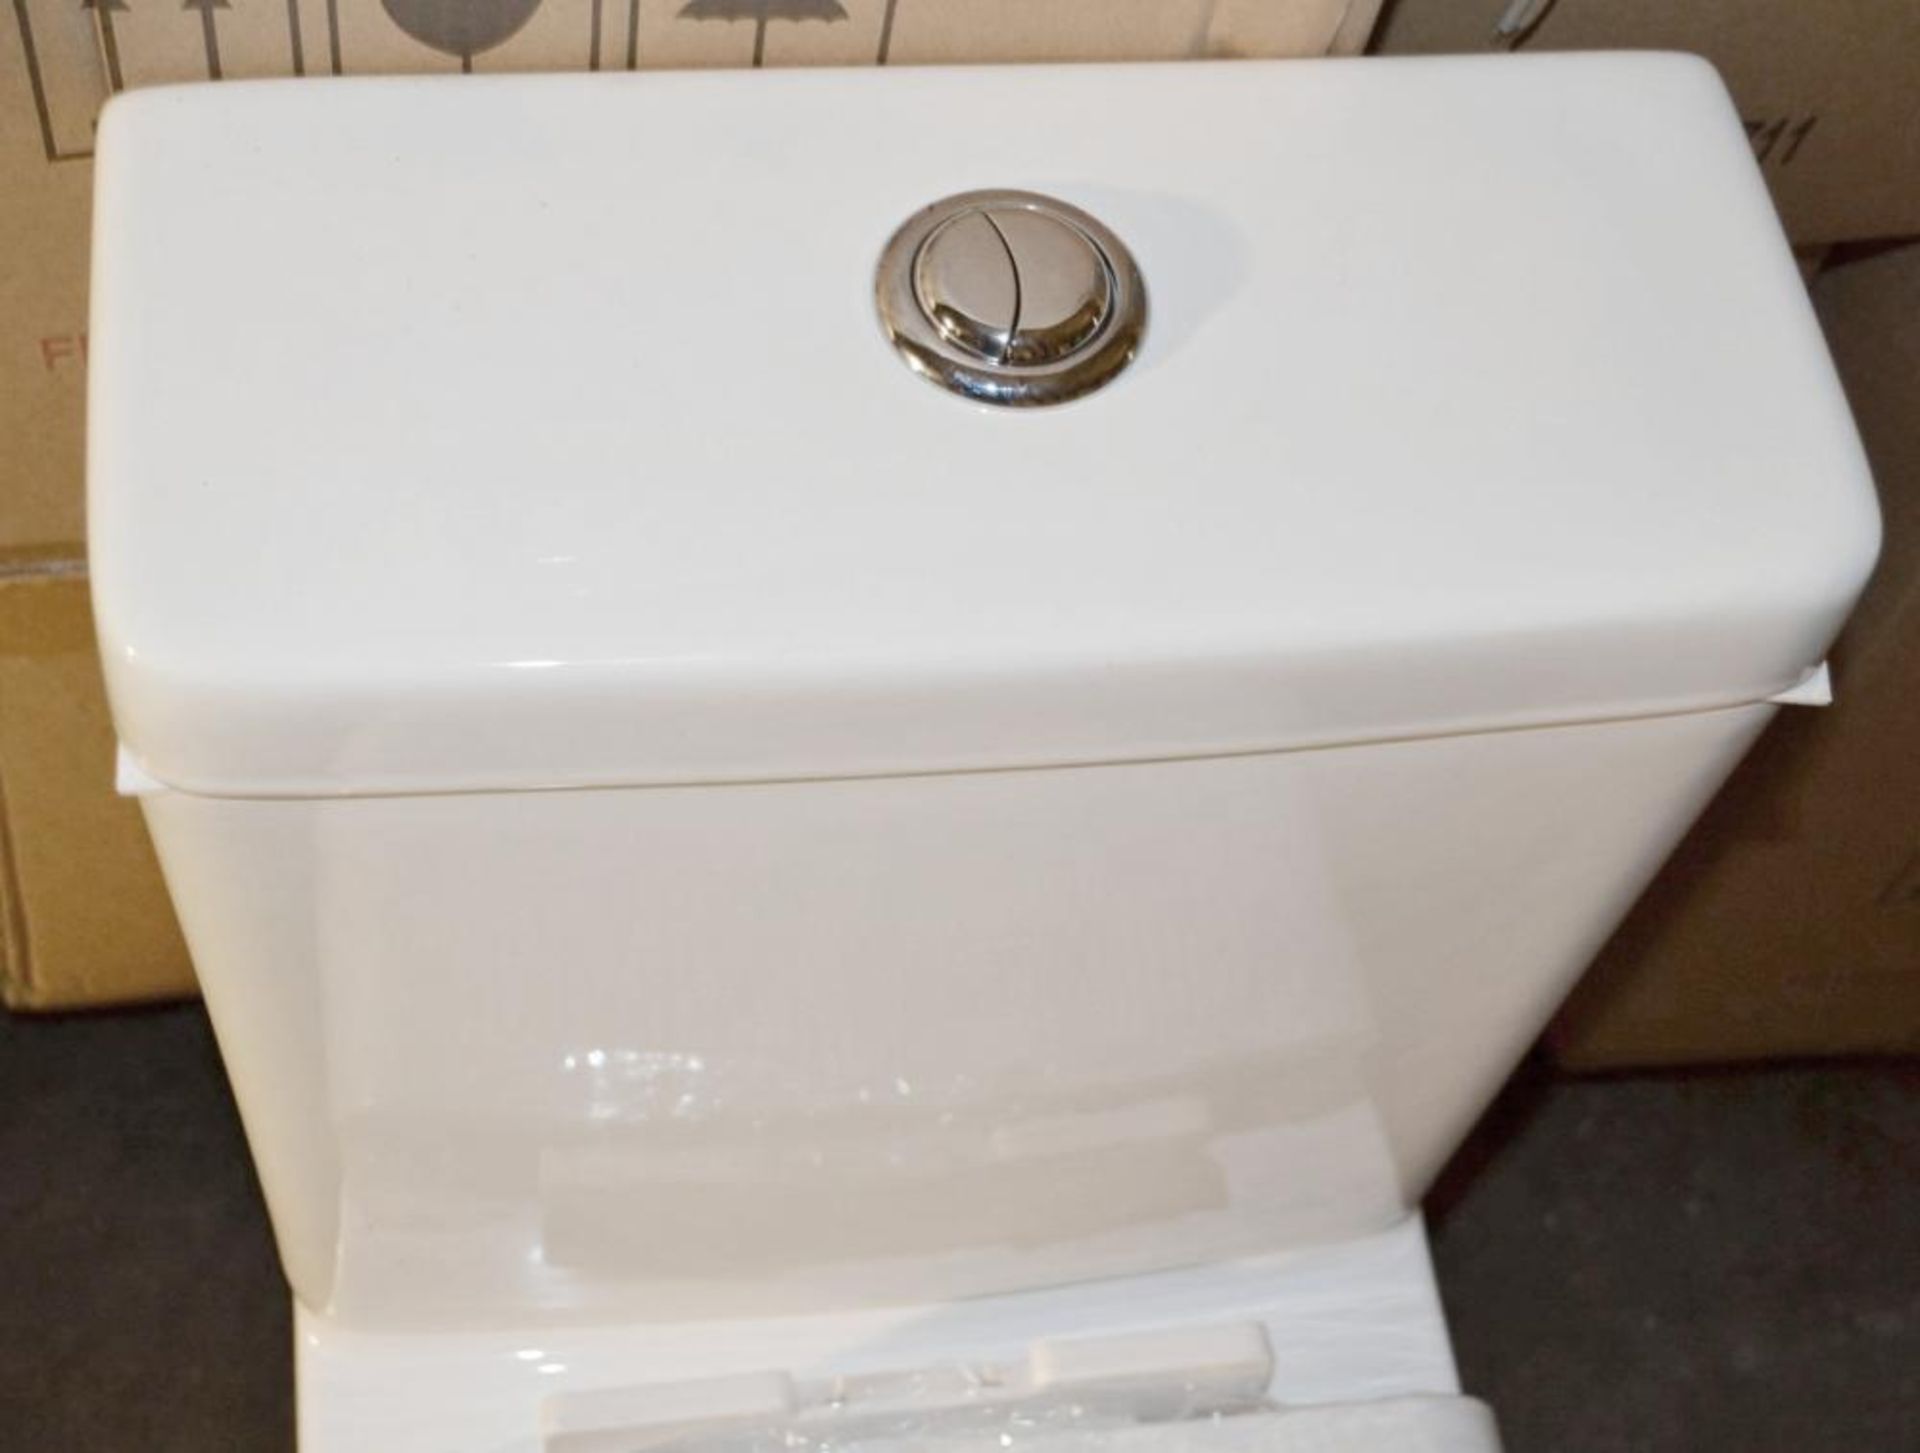 1 x Close Coupled Toilet Pan With Soft Close Toilet Seat And Cistern (Inc. Fittings) - Brand New Box - Image 3 of 10